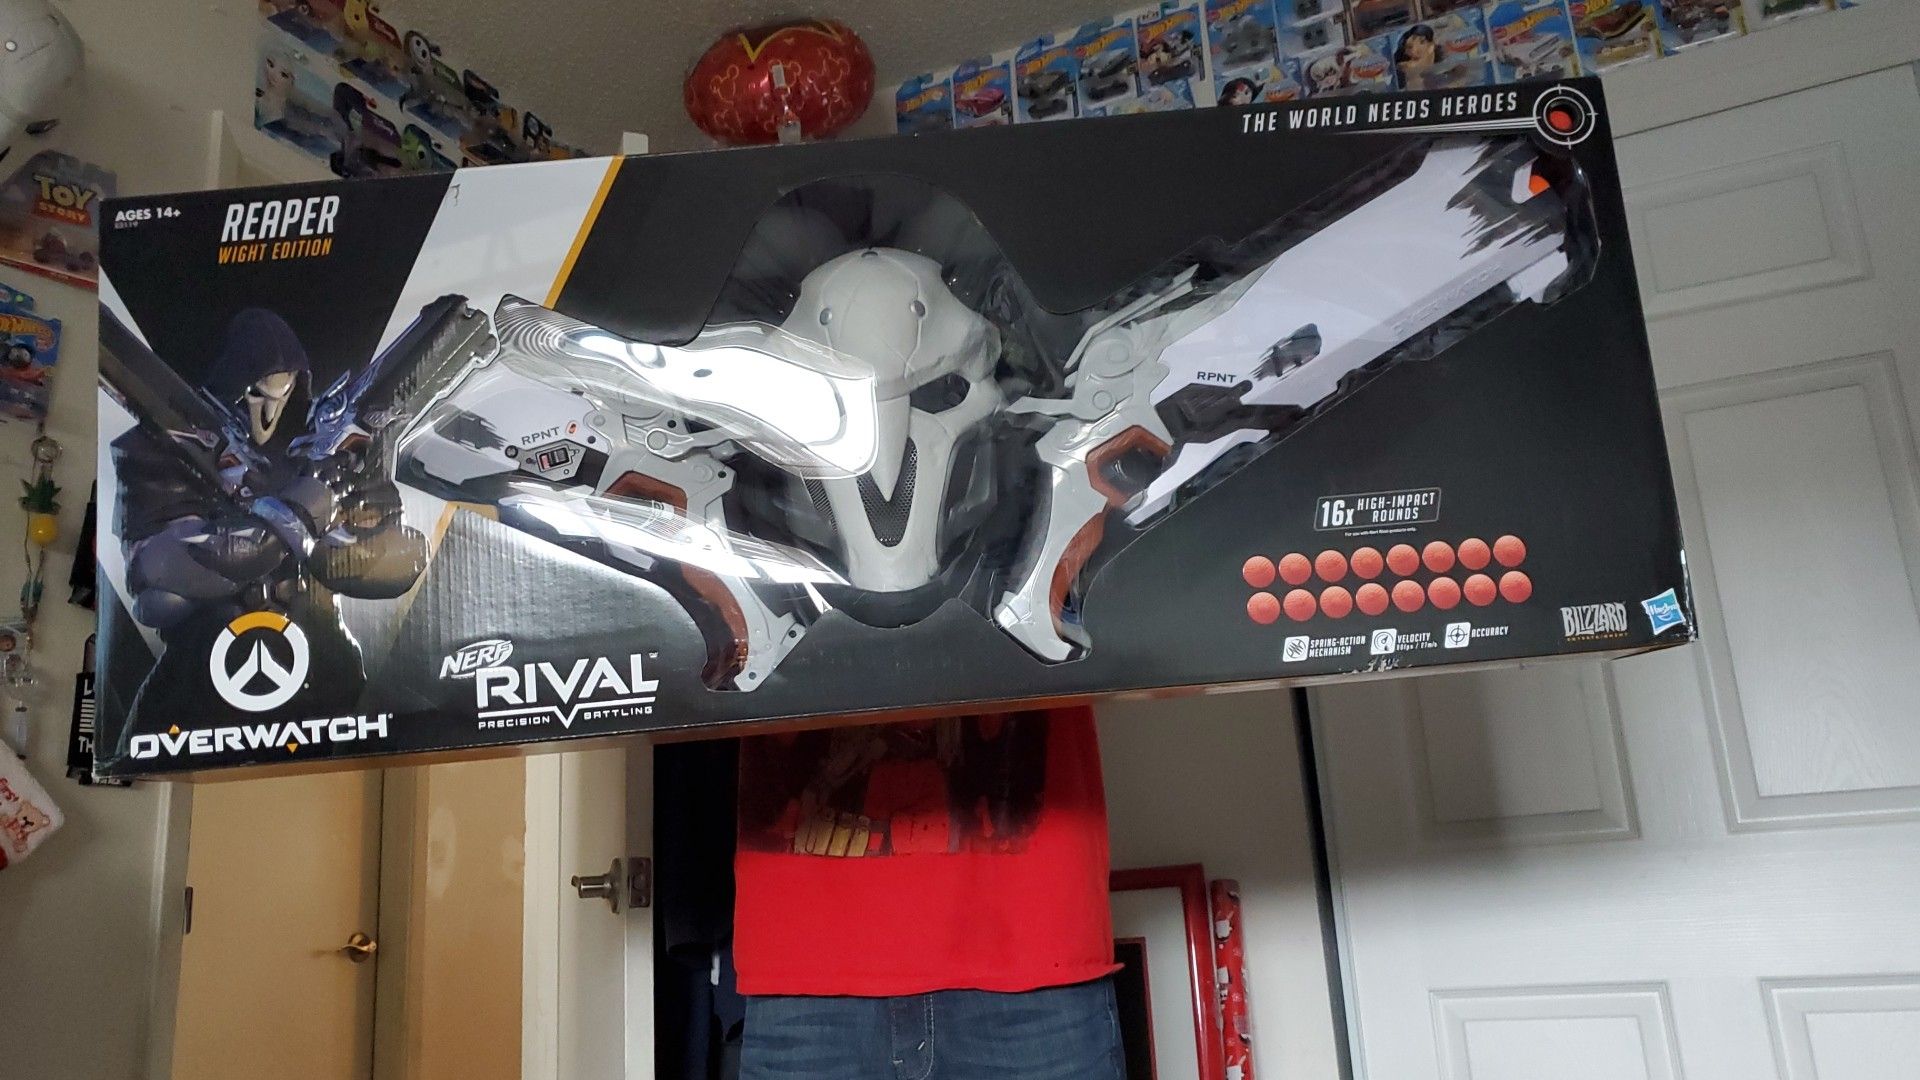 Overwatch rival nerf guns and masks